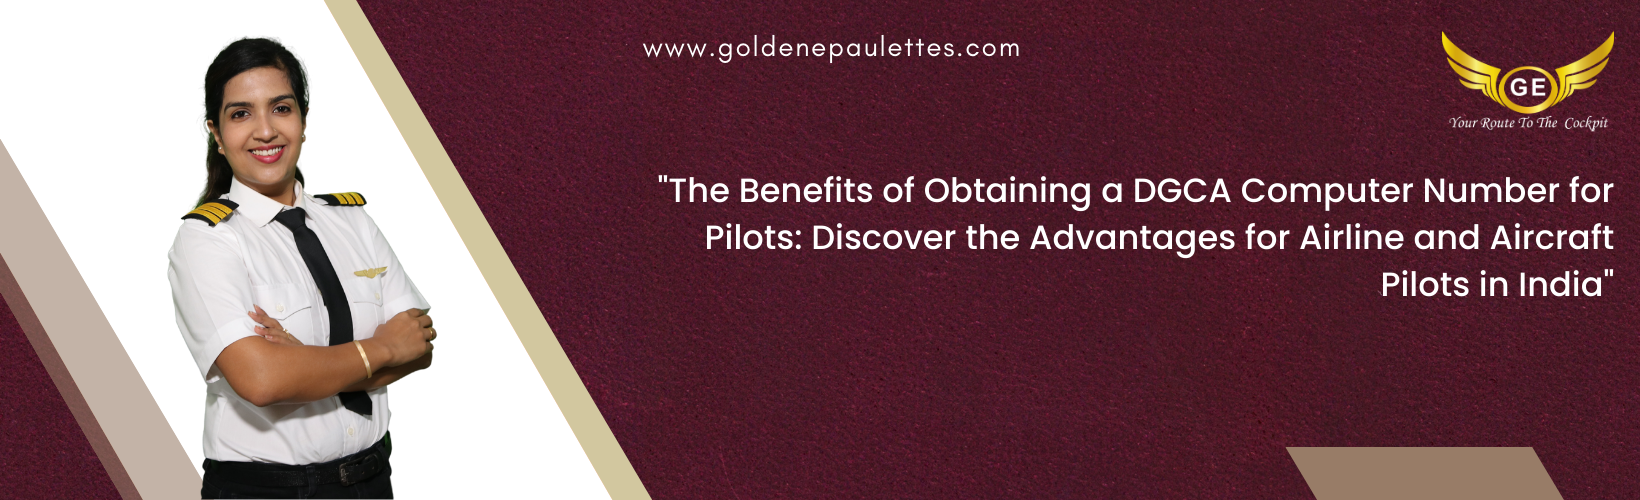 The Benefits of Obtaining a DGCA Computer Number for Pilots